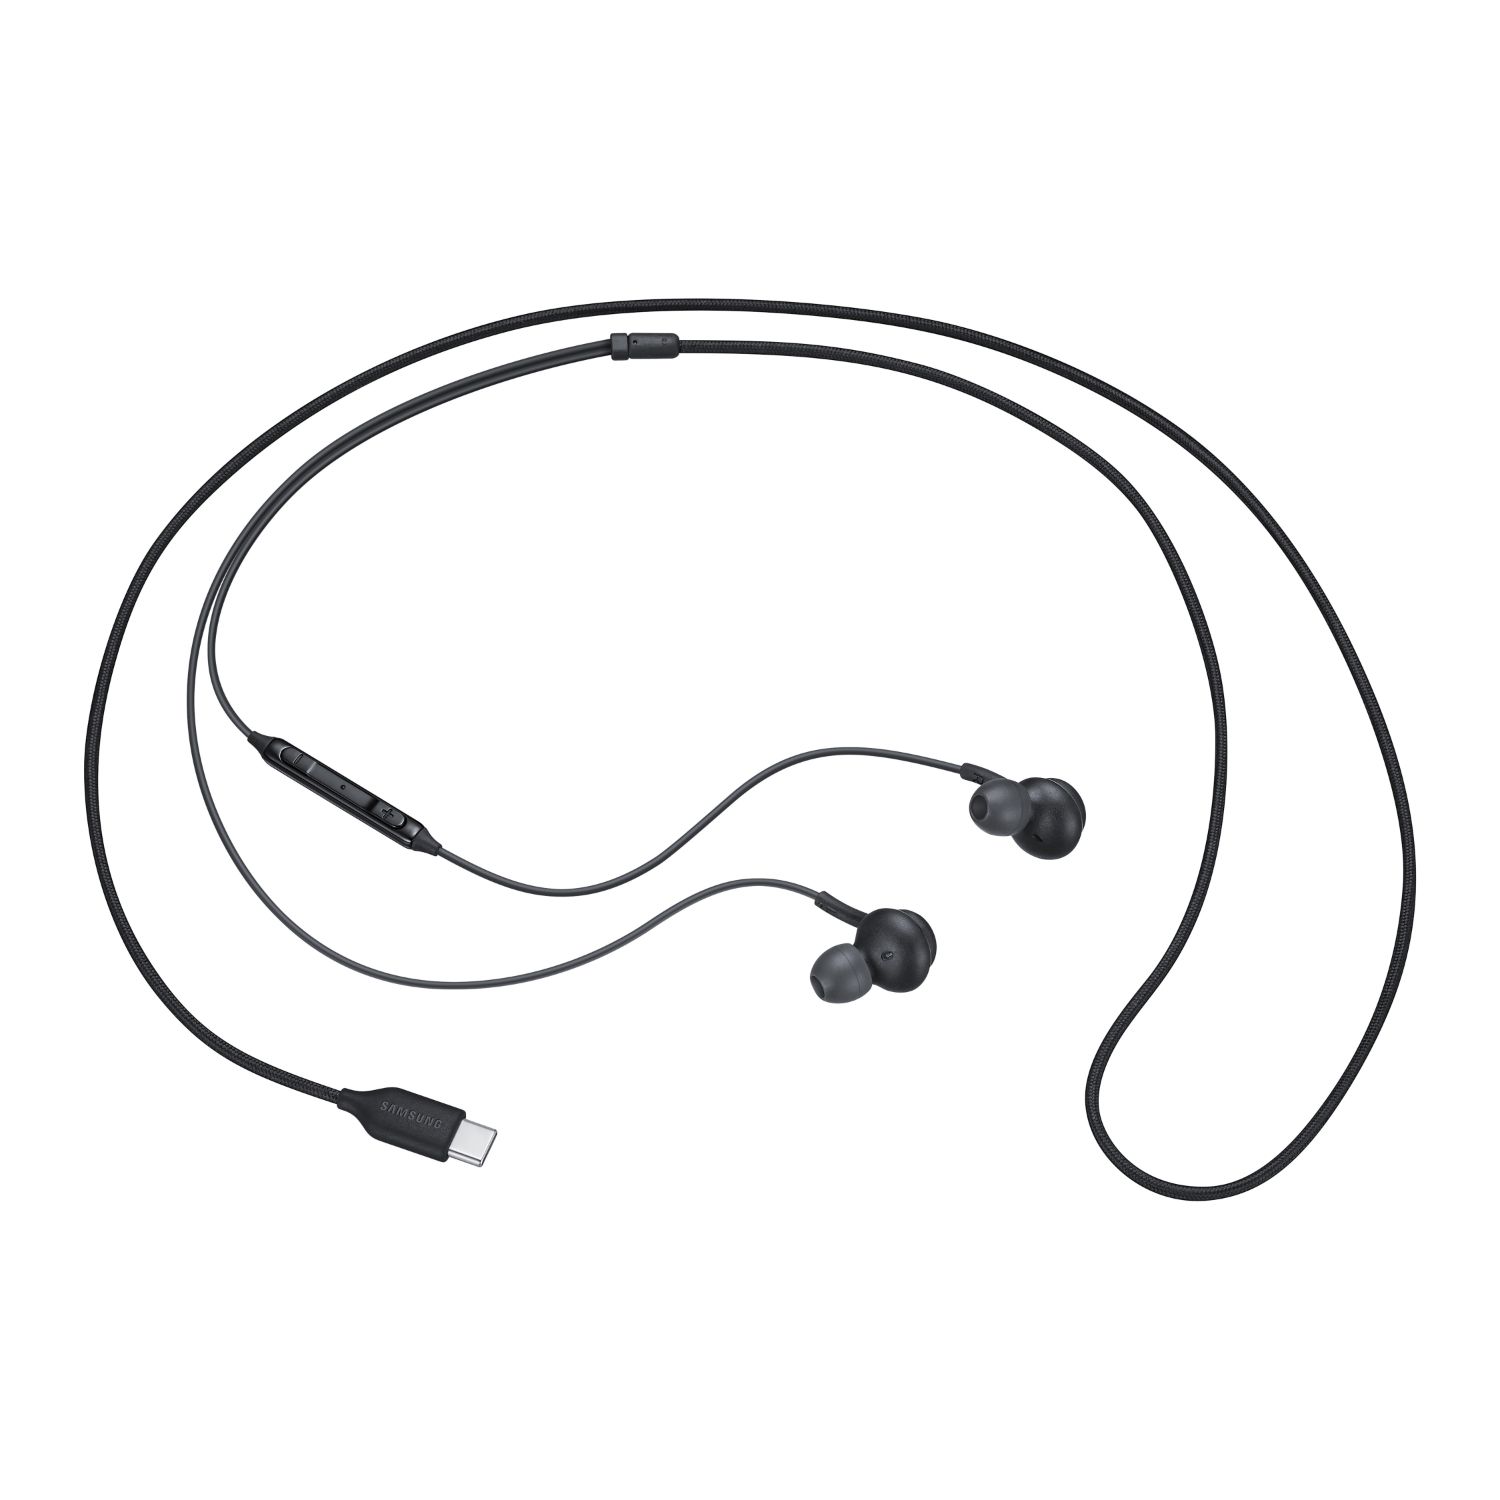 Earphones for Samsung mobile devices